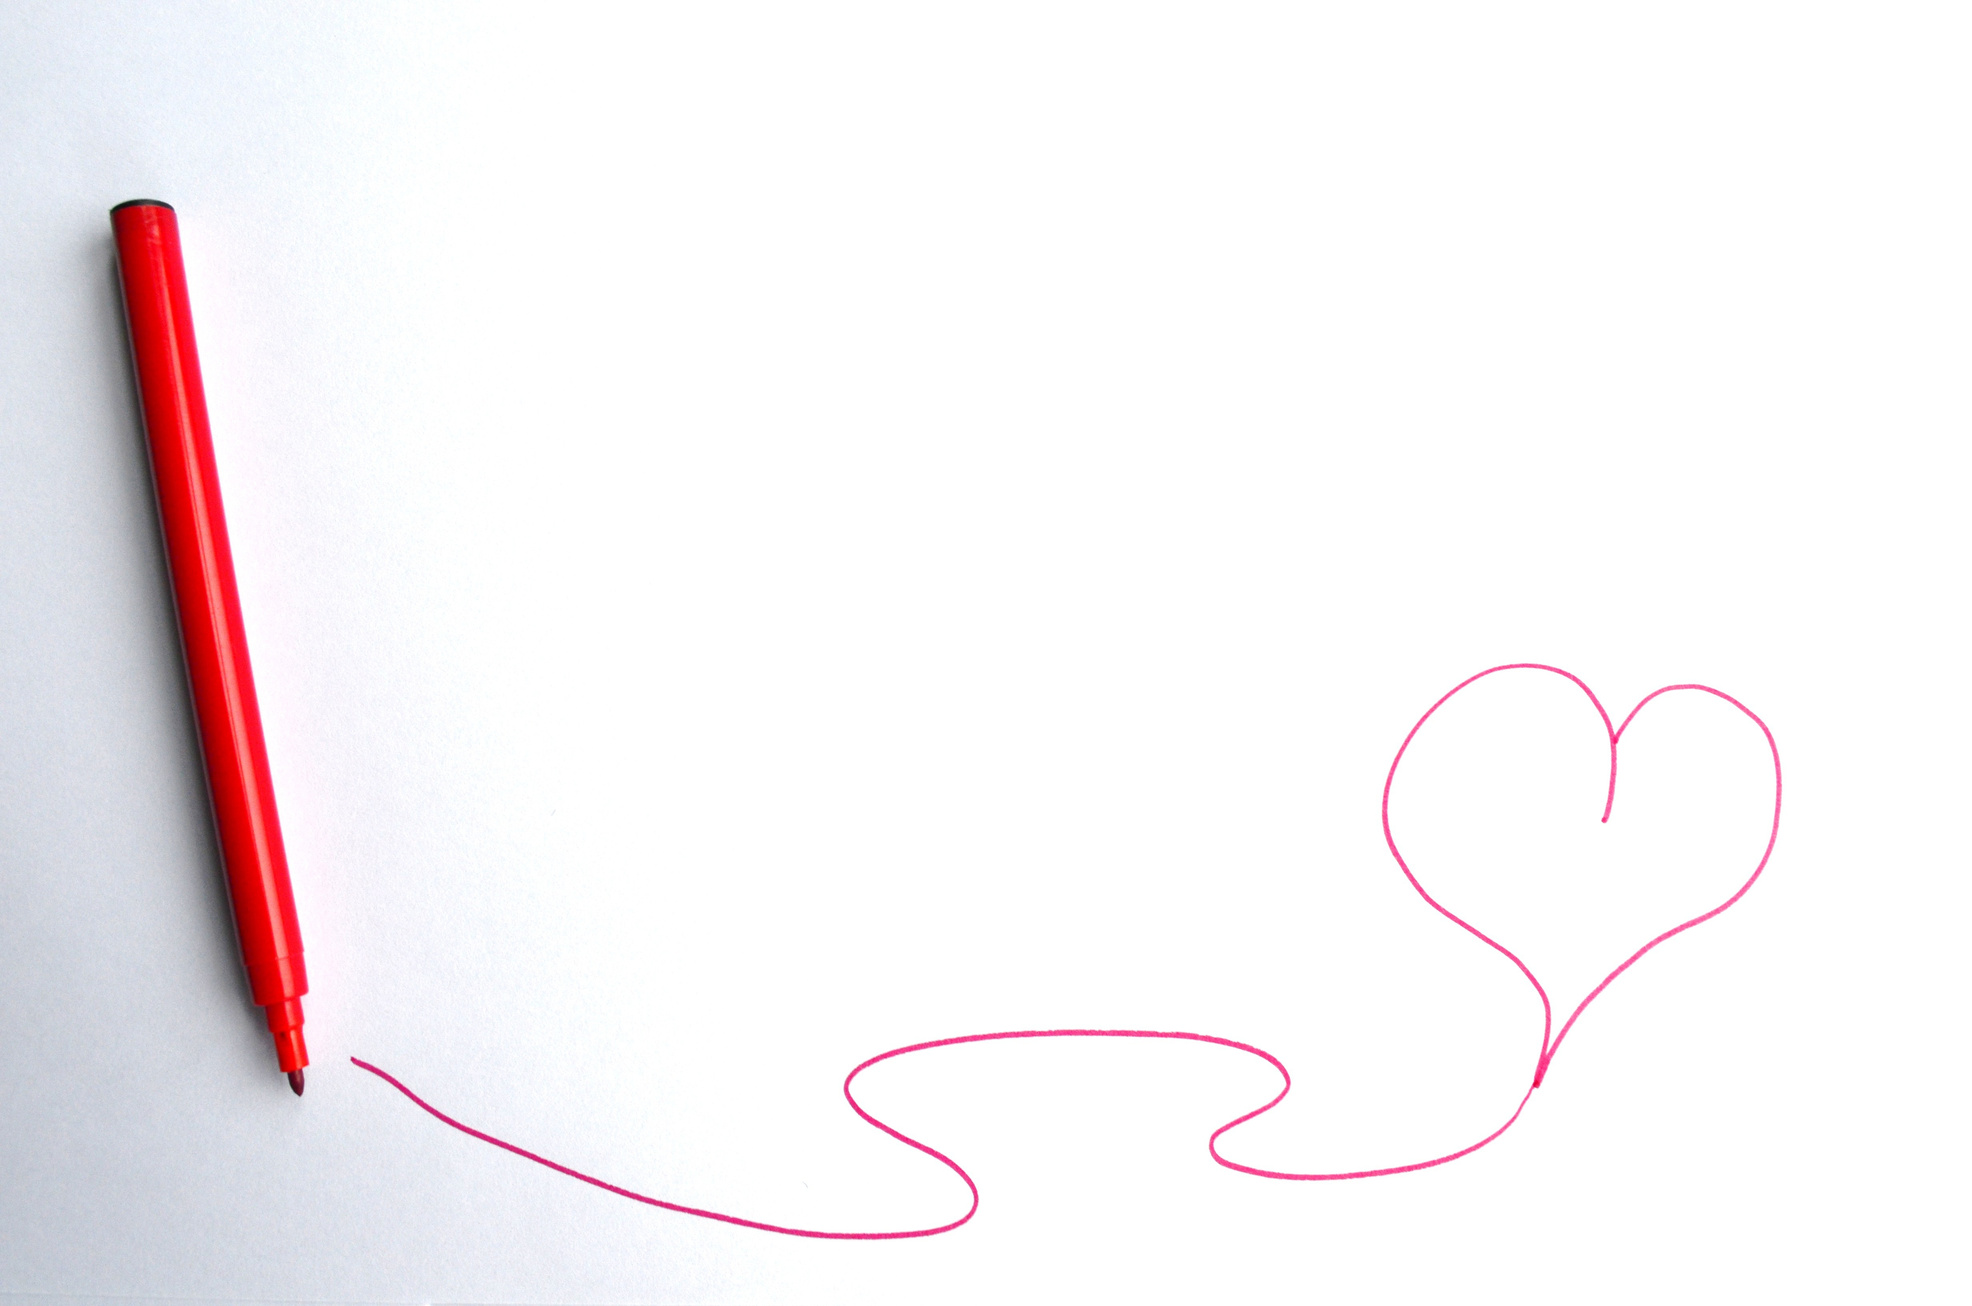 Red Pen Drawing Heart on White Background